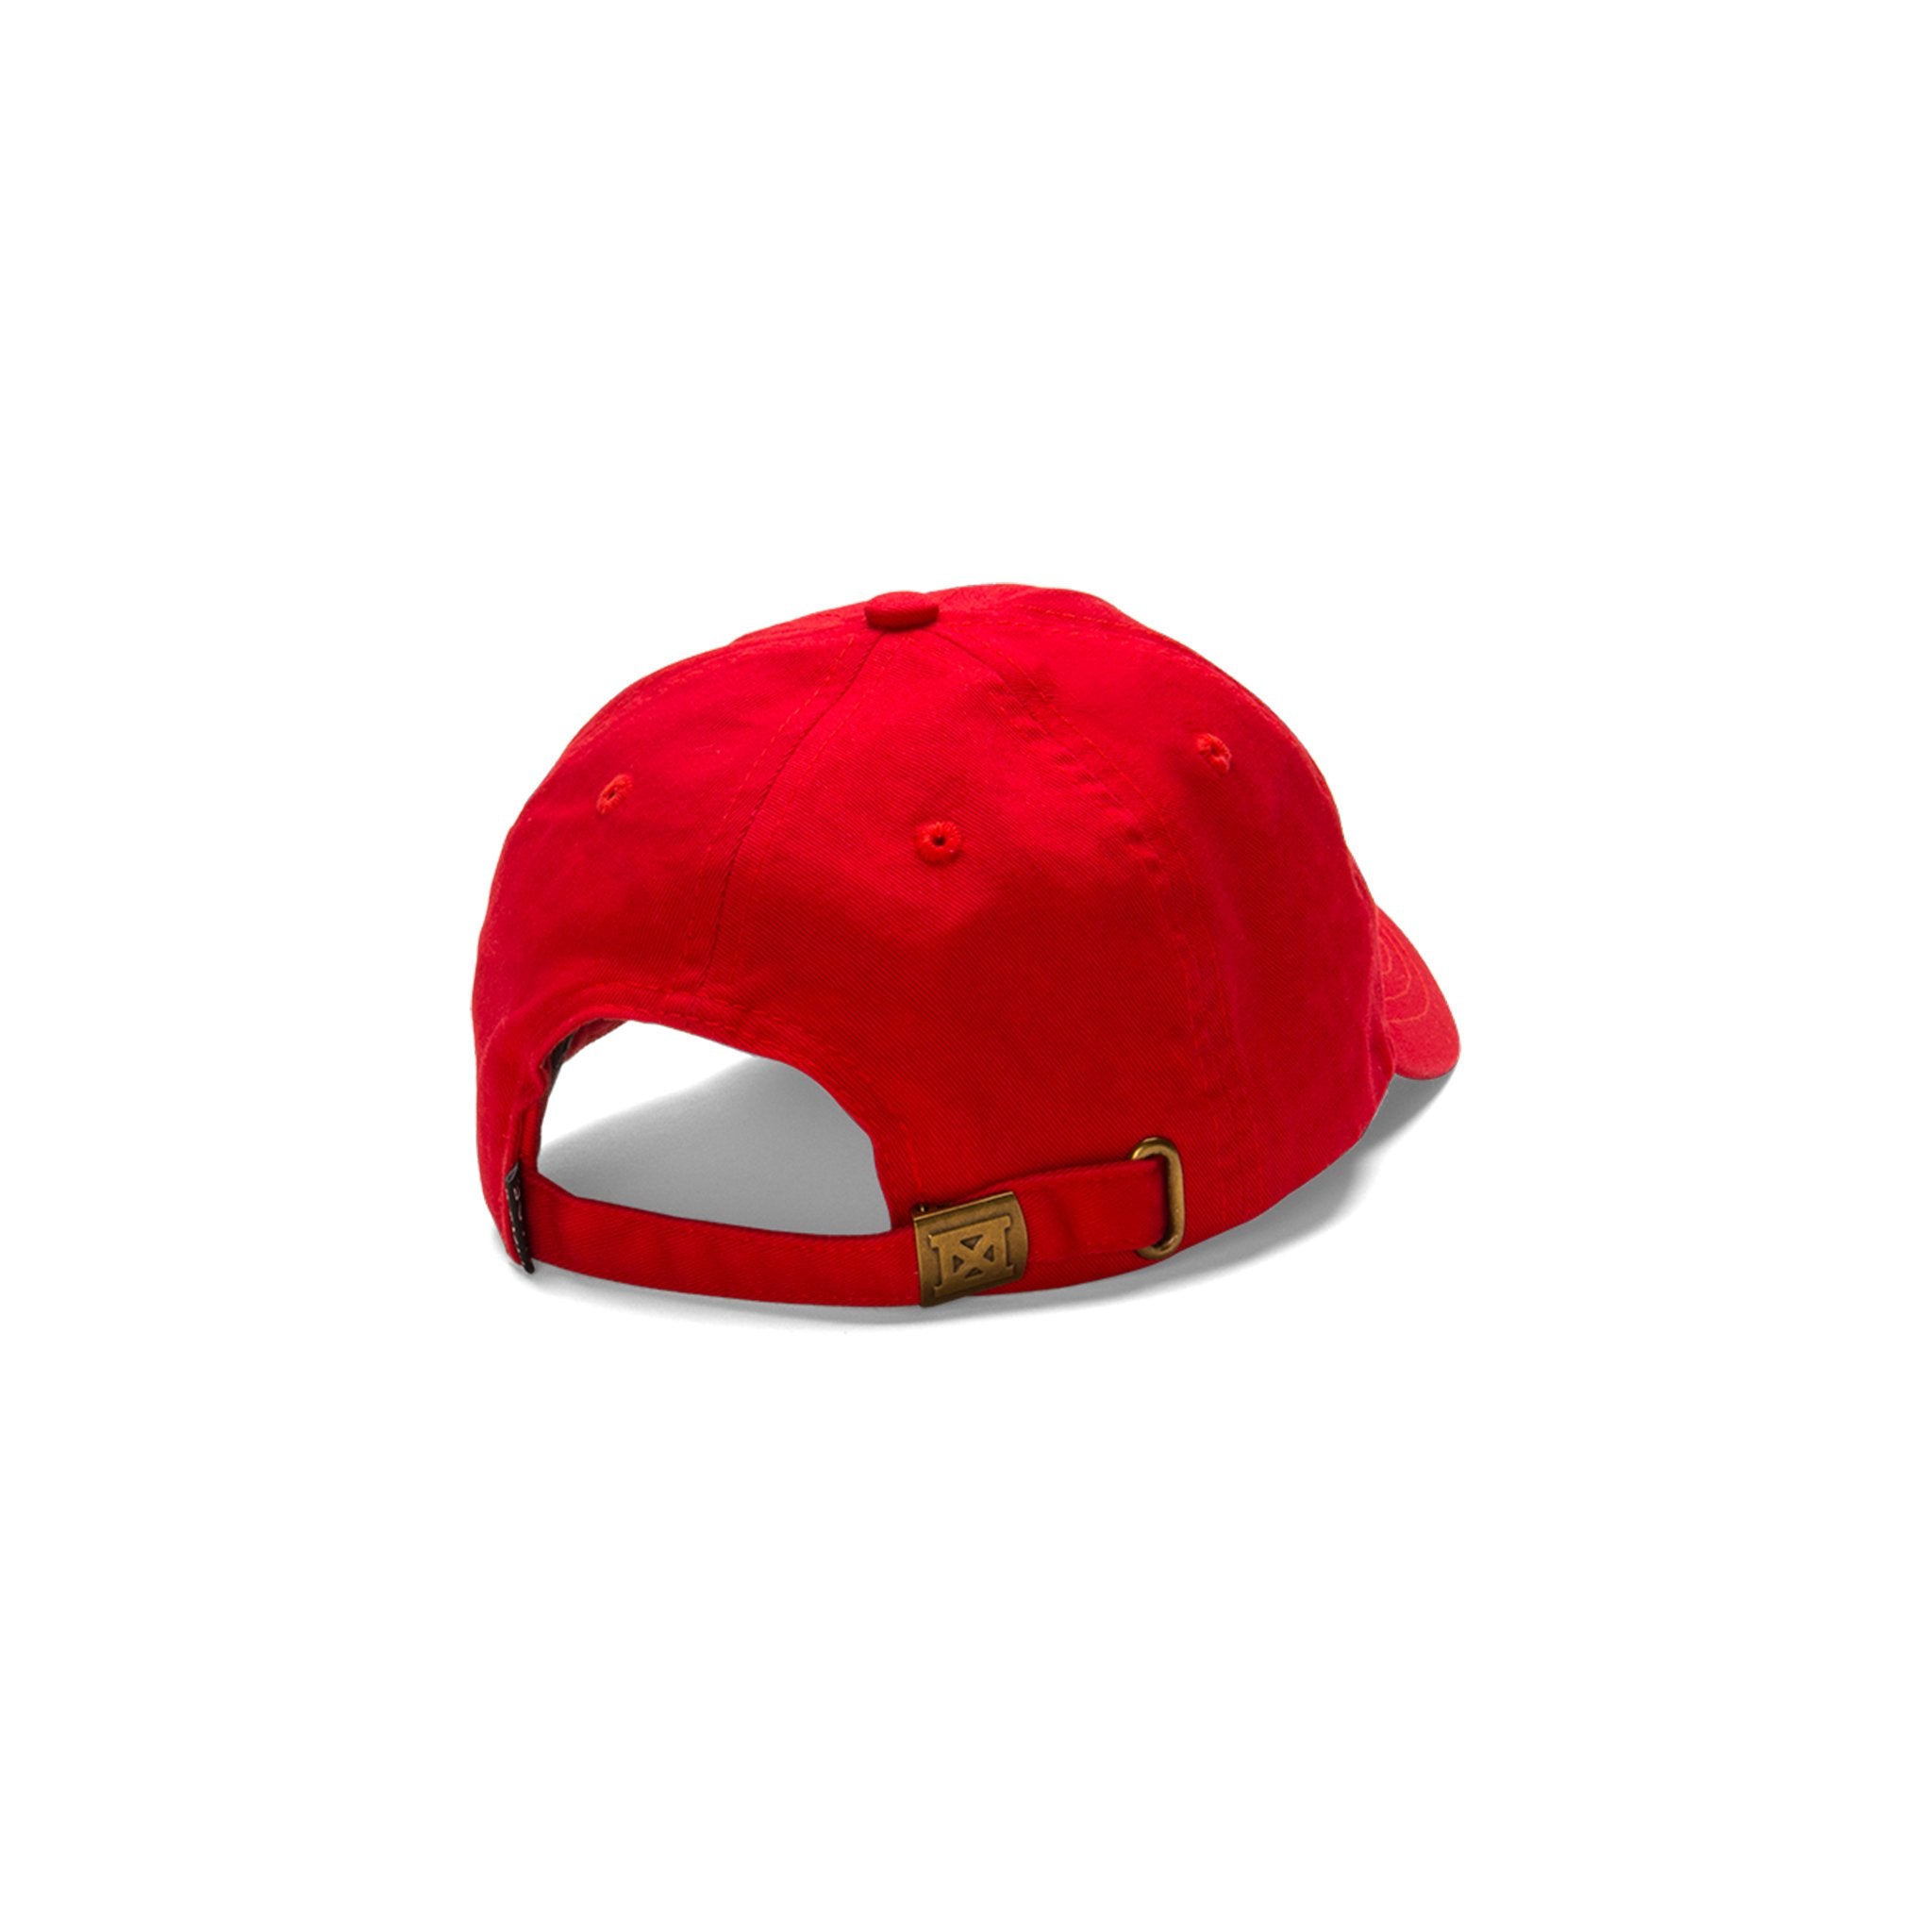 Signature KC Son Hat - Kids Size - Red